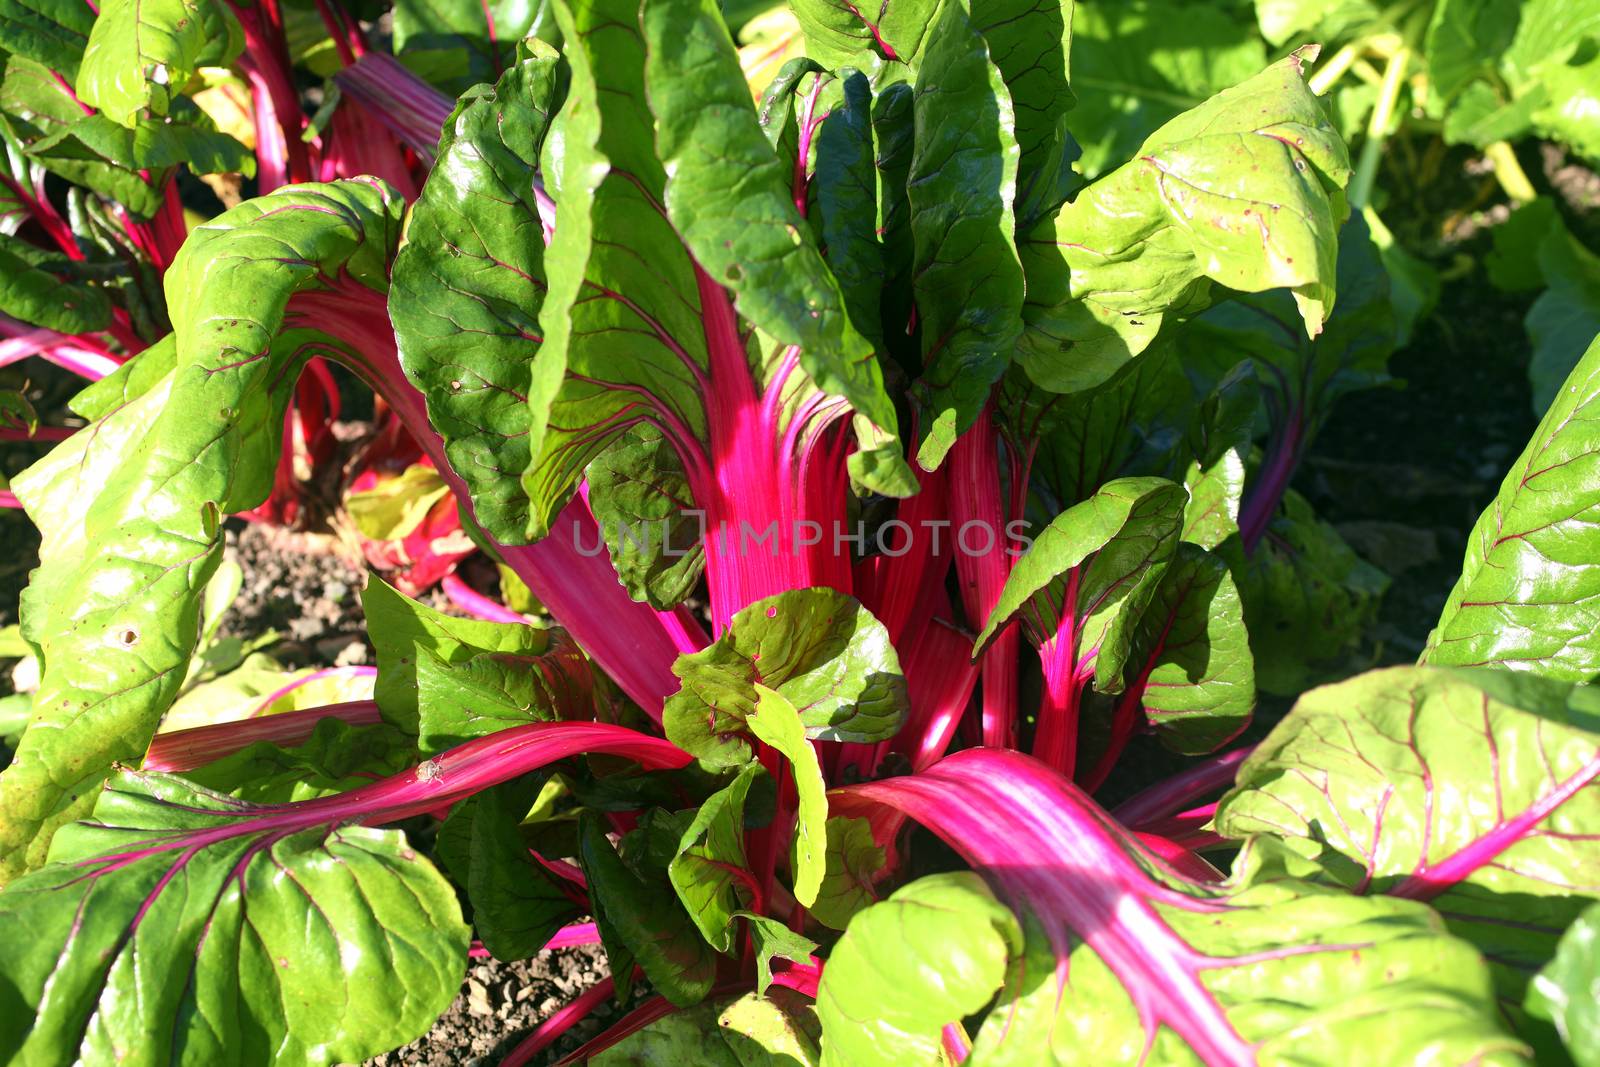 Swiss chard, Beta vulgaris subsp Cicla var flavescens 'Pink Passion' a vegetable salad crop food with health diet benefits stock photo